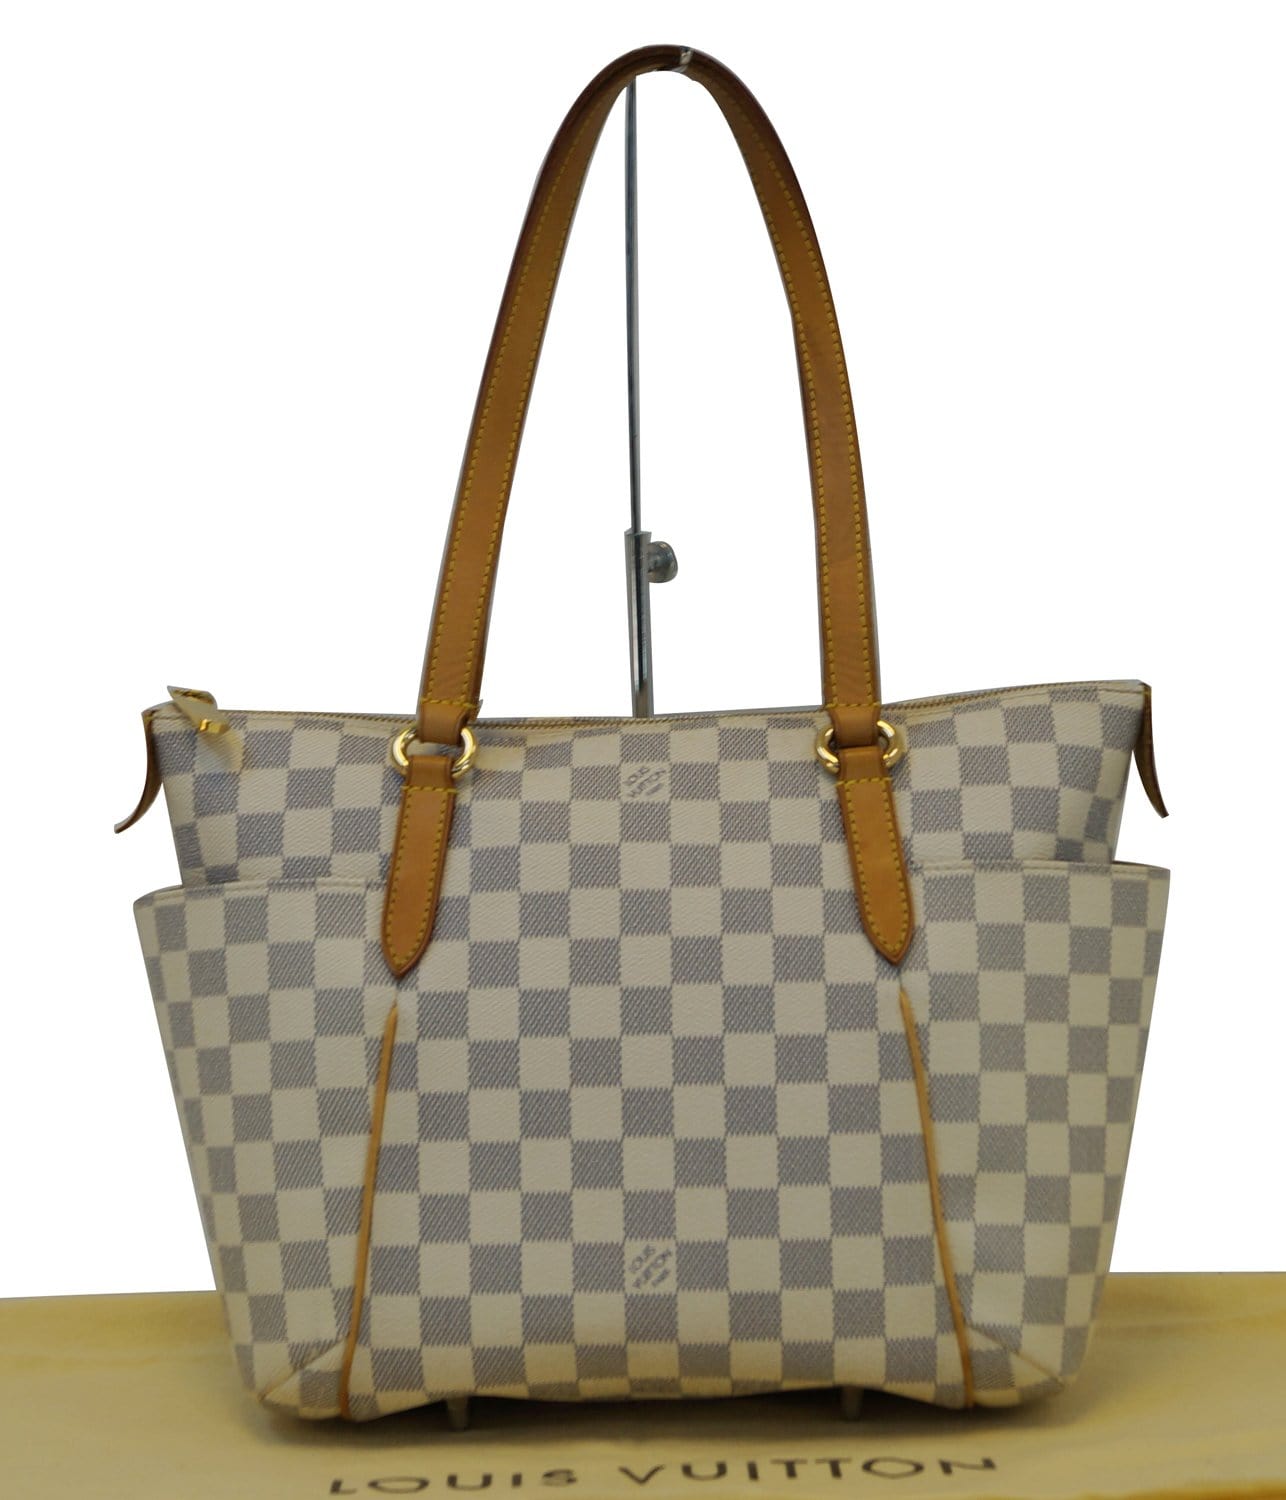 Auth Louis Vuitton Tote Bag Totally MM Damier Azur White N51262 From  Japan230719